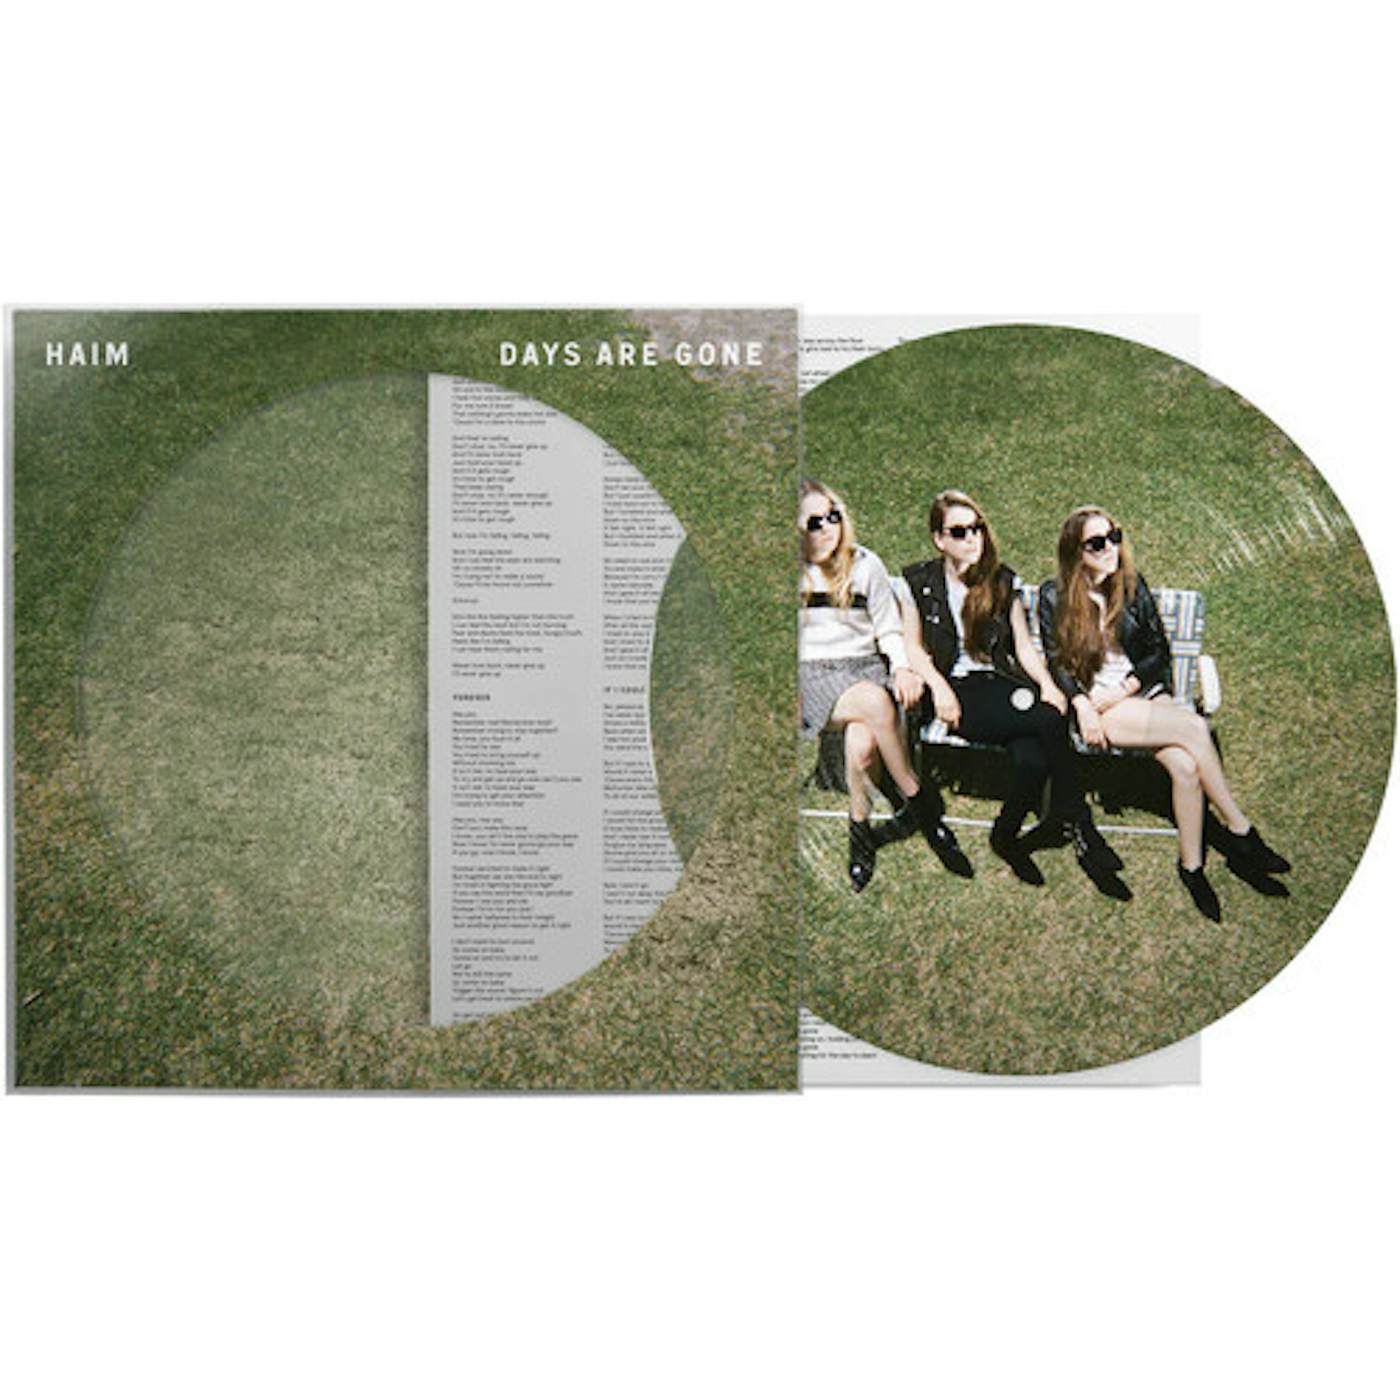 HAIM Days Are Gone (Limited Edition) Vinyl Record